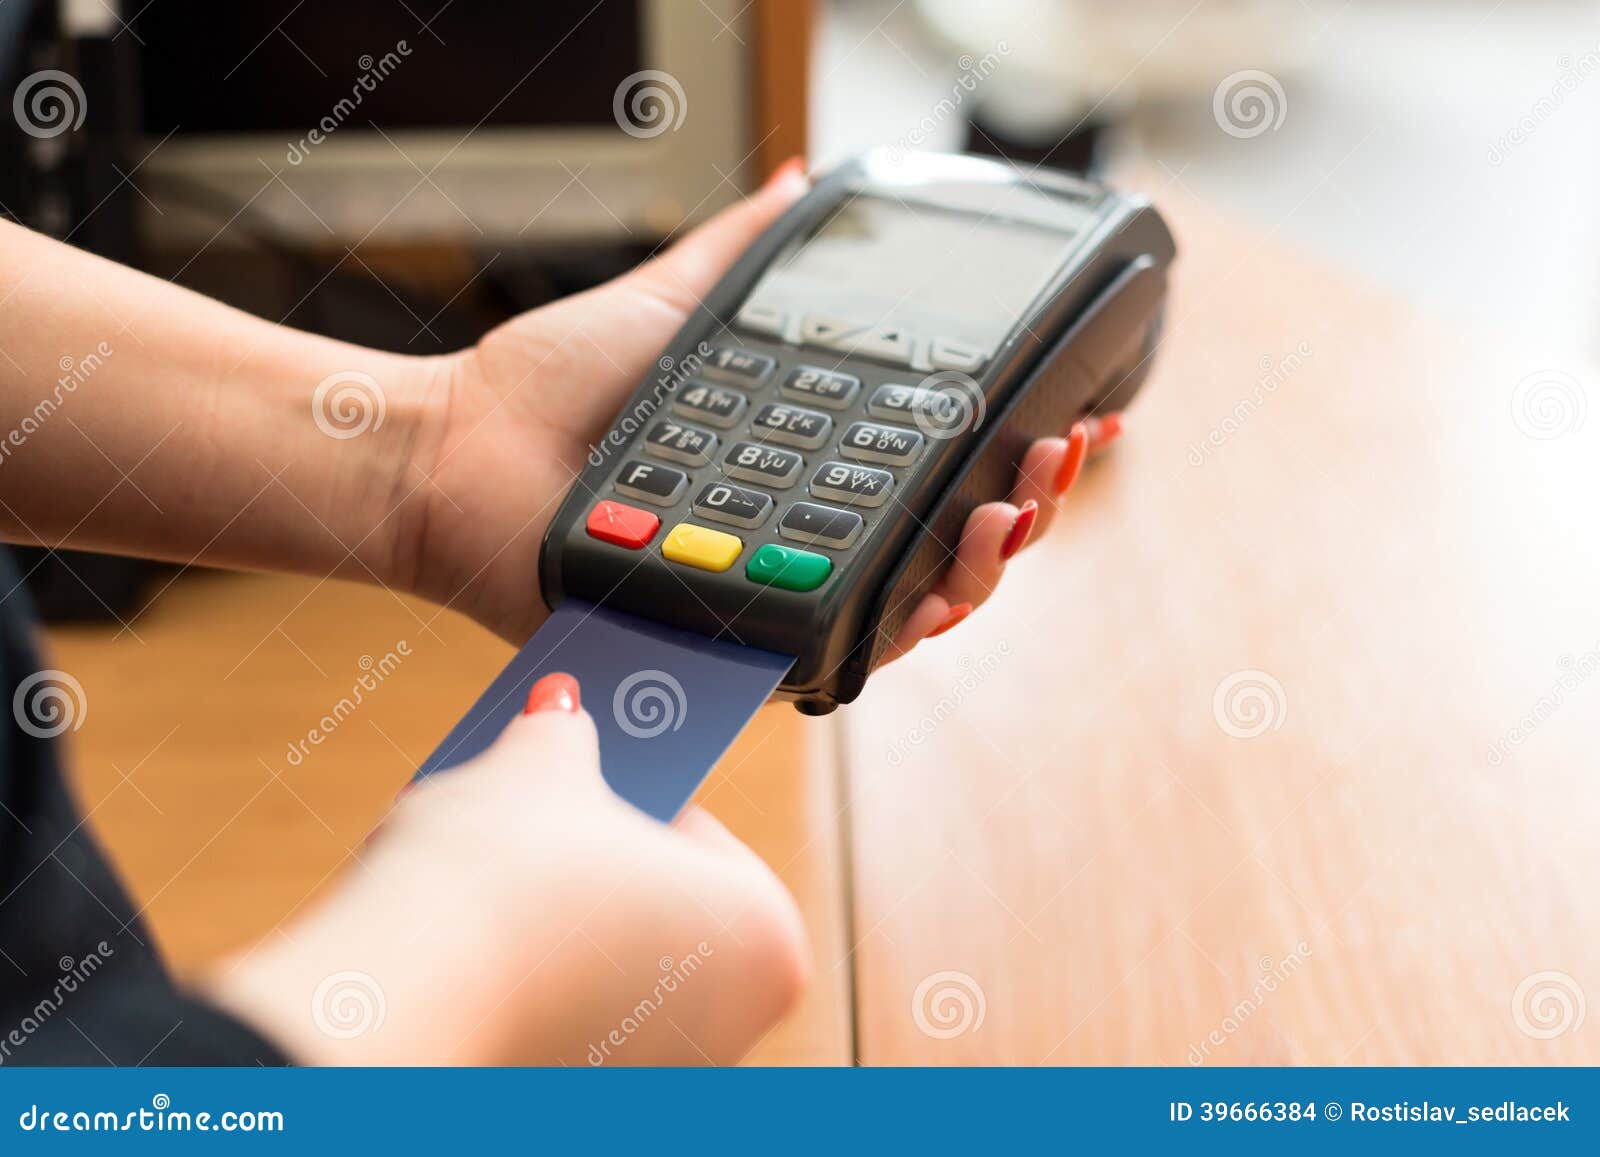 woman pay by credit card